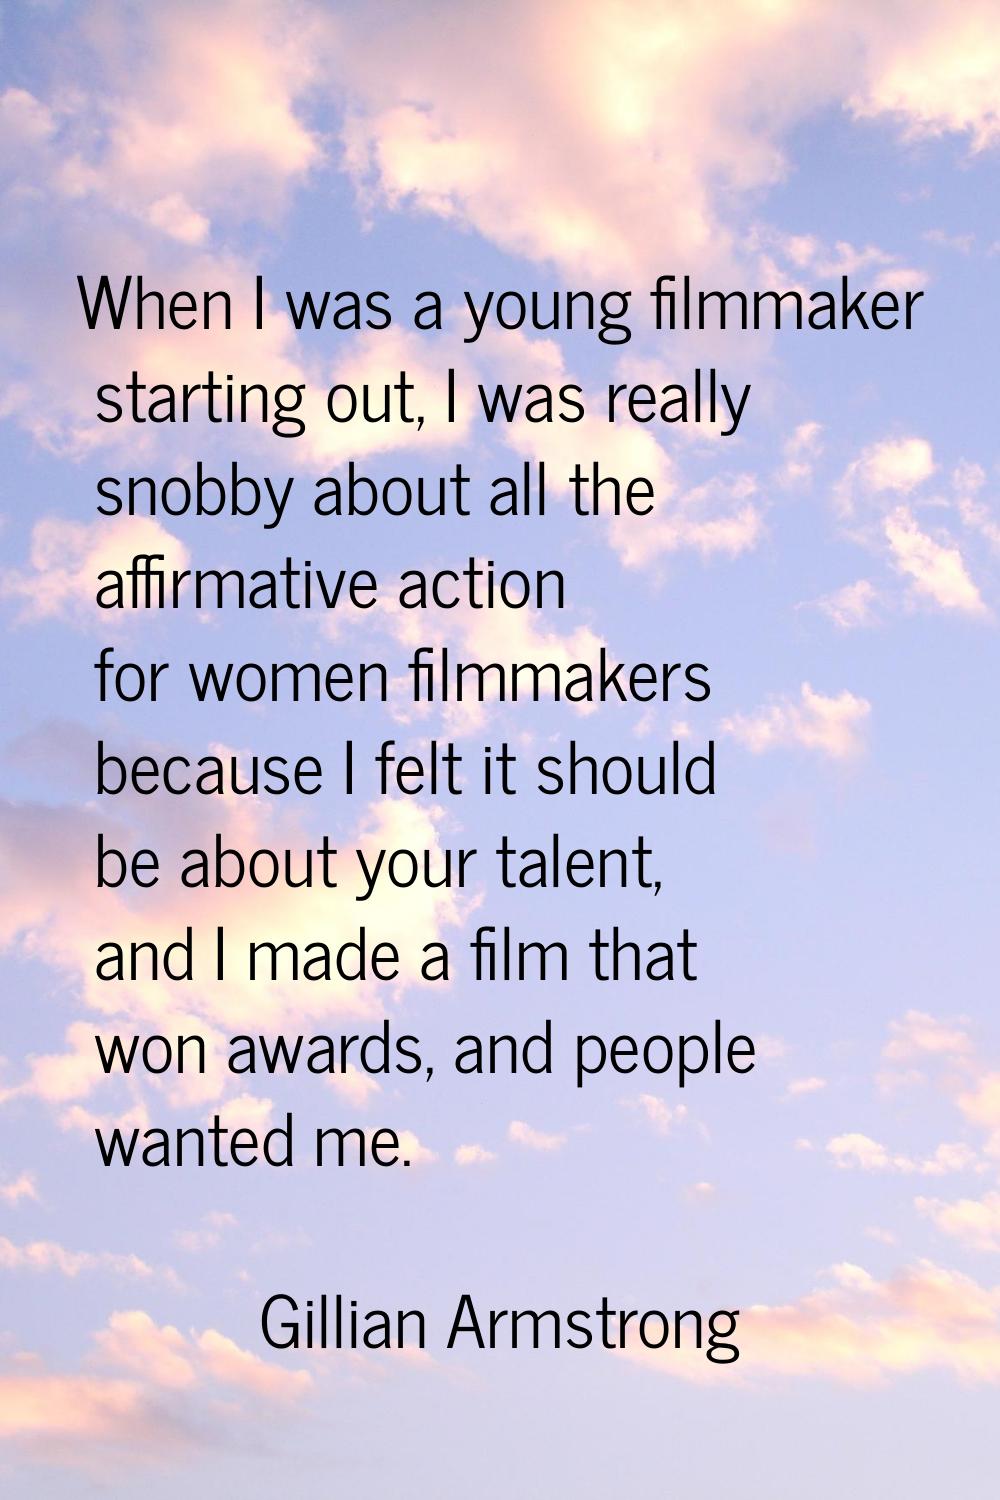 When I was a young filmmaker starting out, I was really snobby about all the affirmative action for